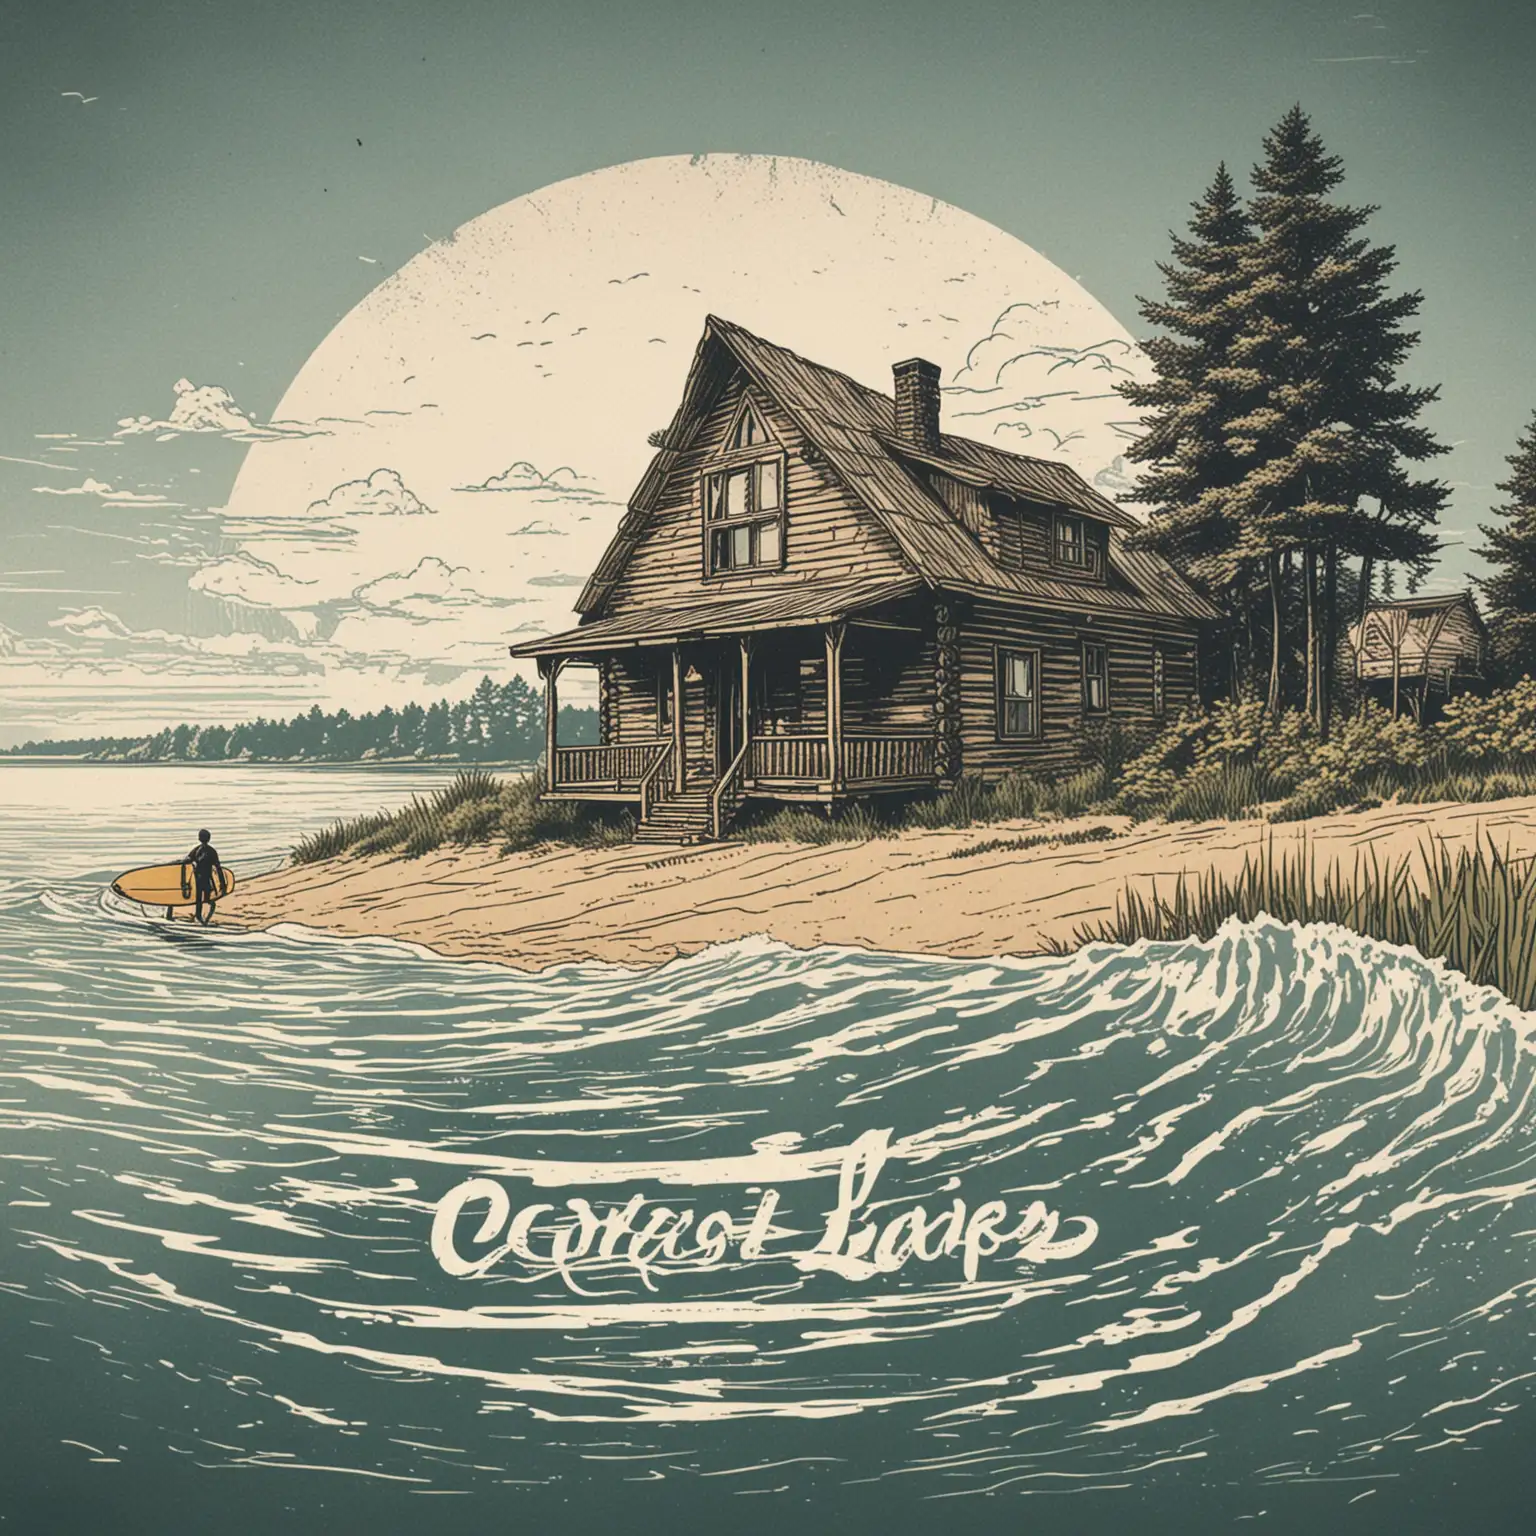 Provide me with a logo of a cabin at the Great Lakes, cornfields, Lake Michigan, Wisconsin, a cabin in the background, a man surfing a longboard on the lake in front of the cabin, hand-drawn, single color, and in 1970's style